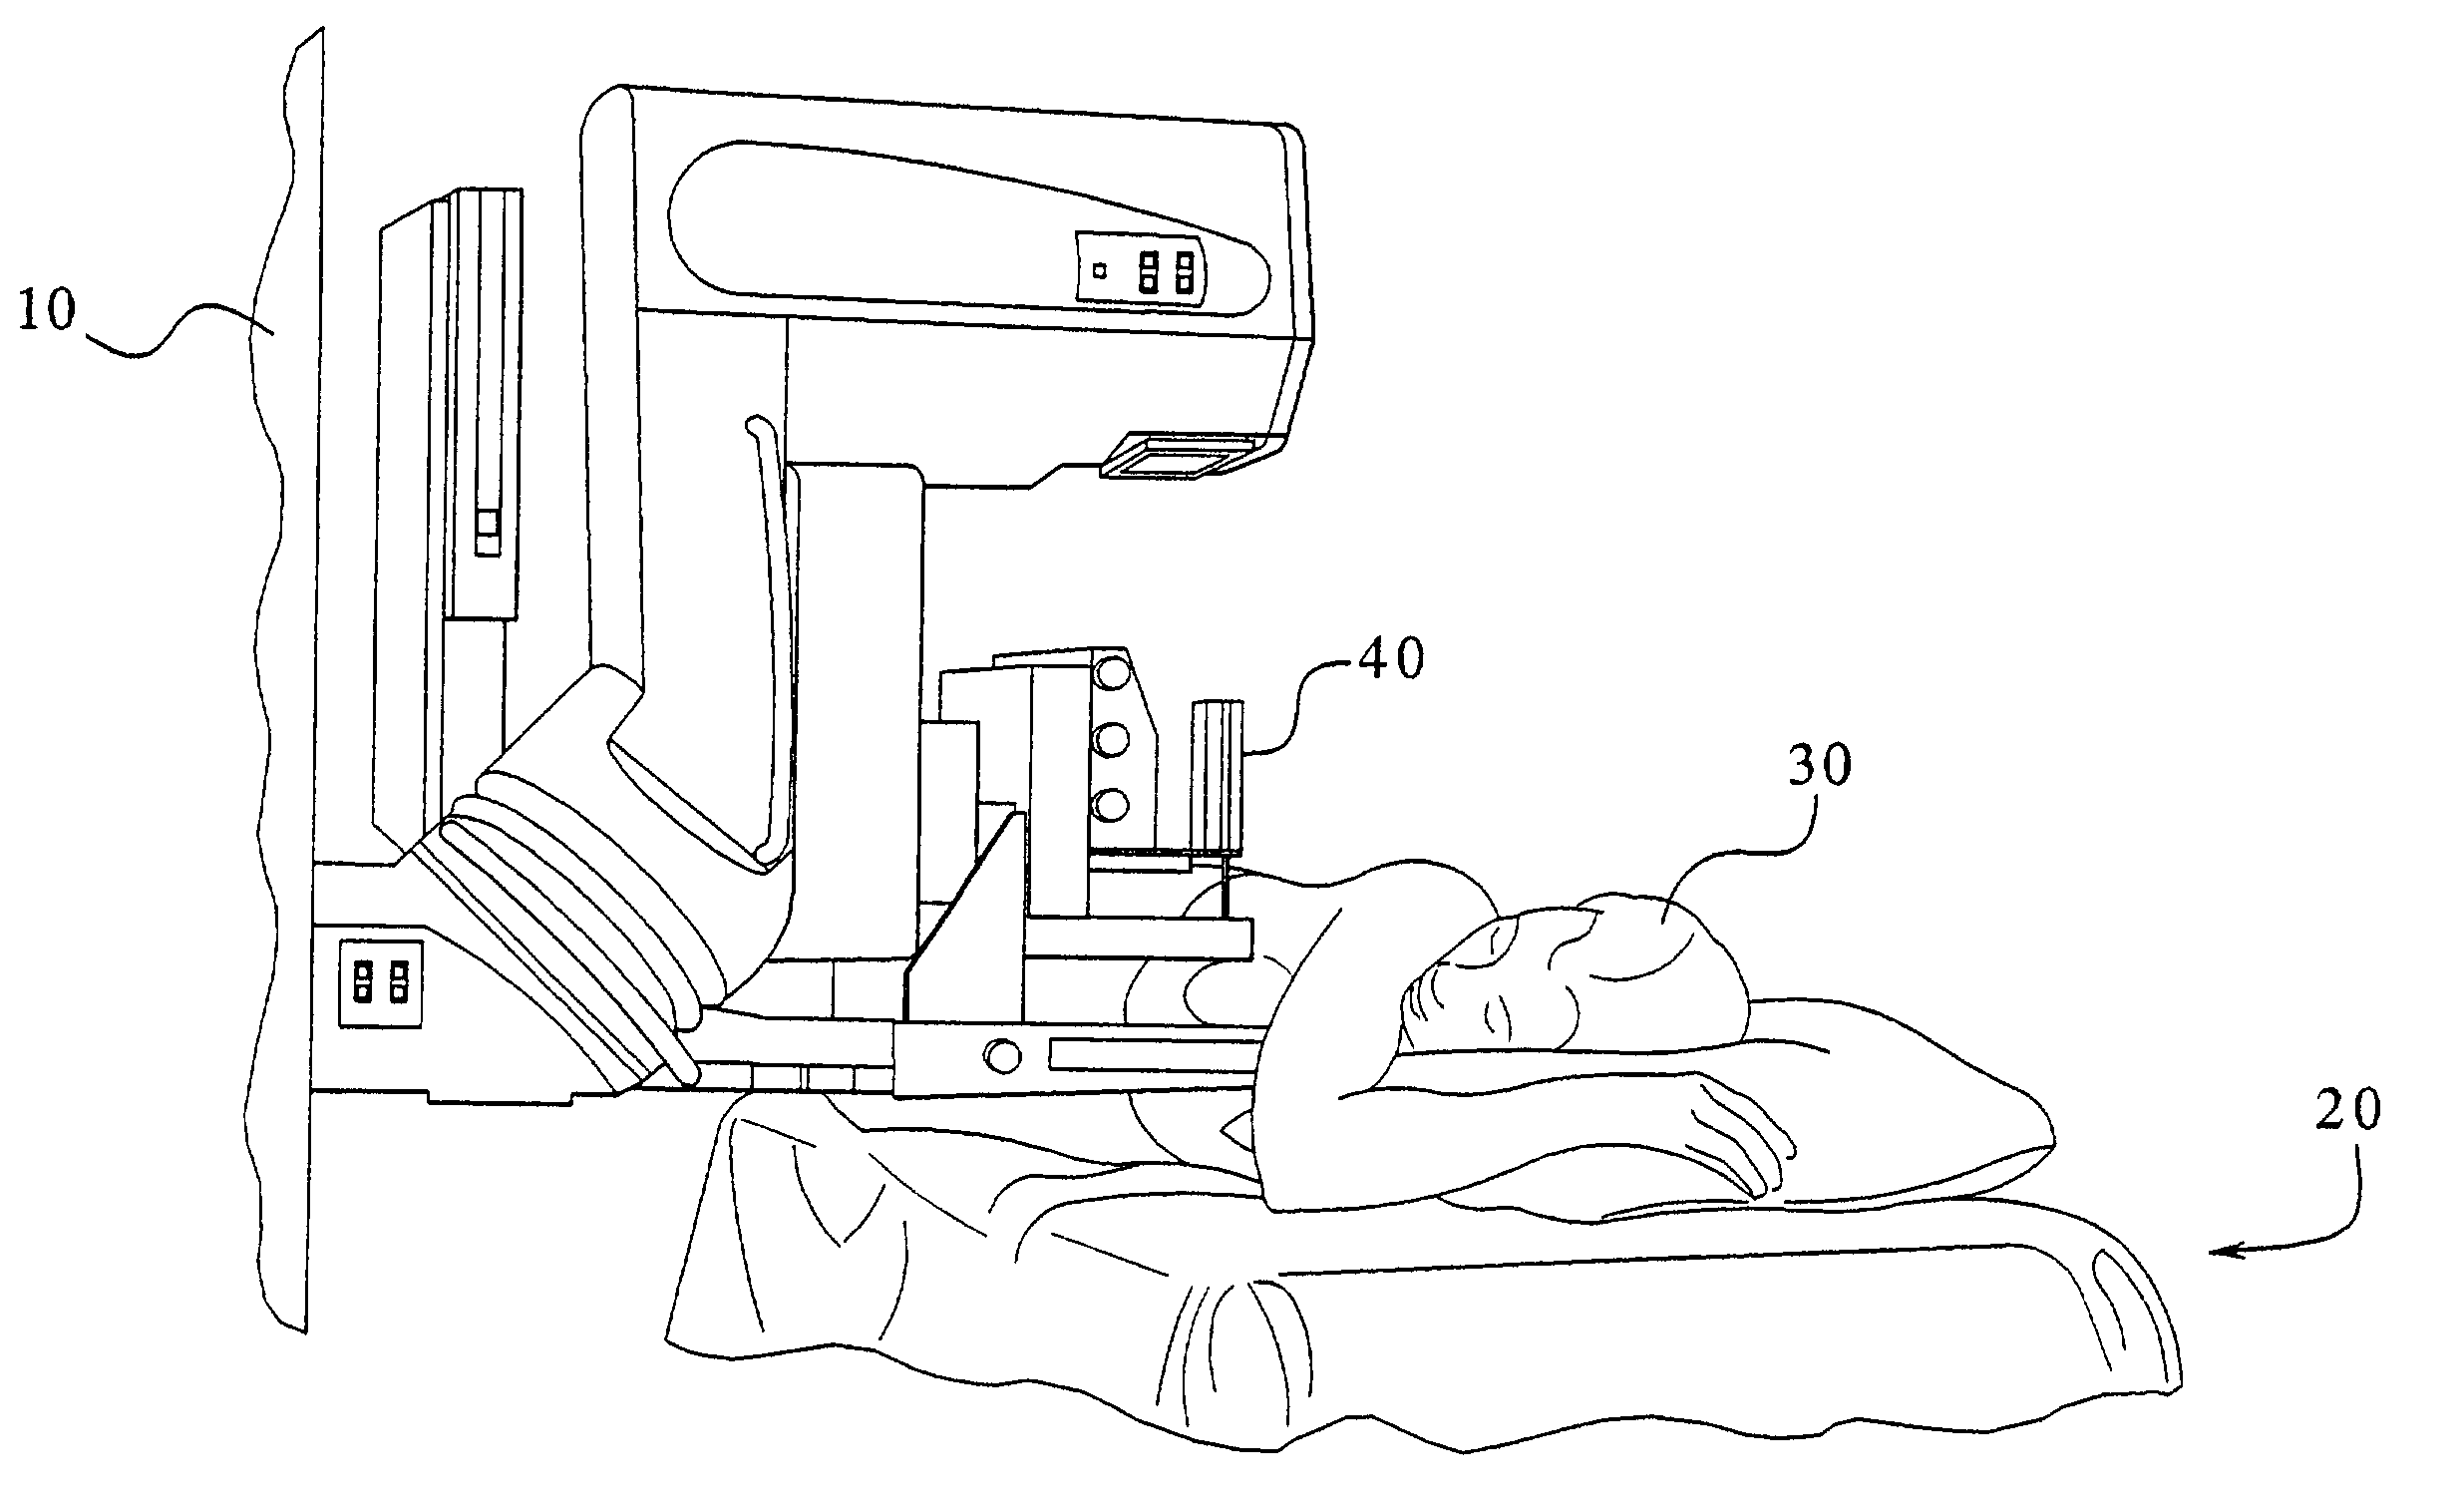 Apparatus and method for interstitial laser therapy of small breast cancers and adjunctive therapy